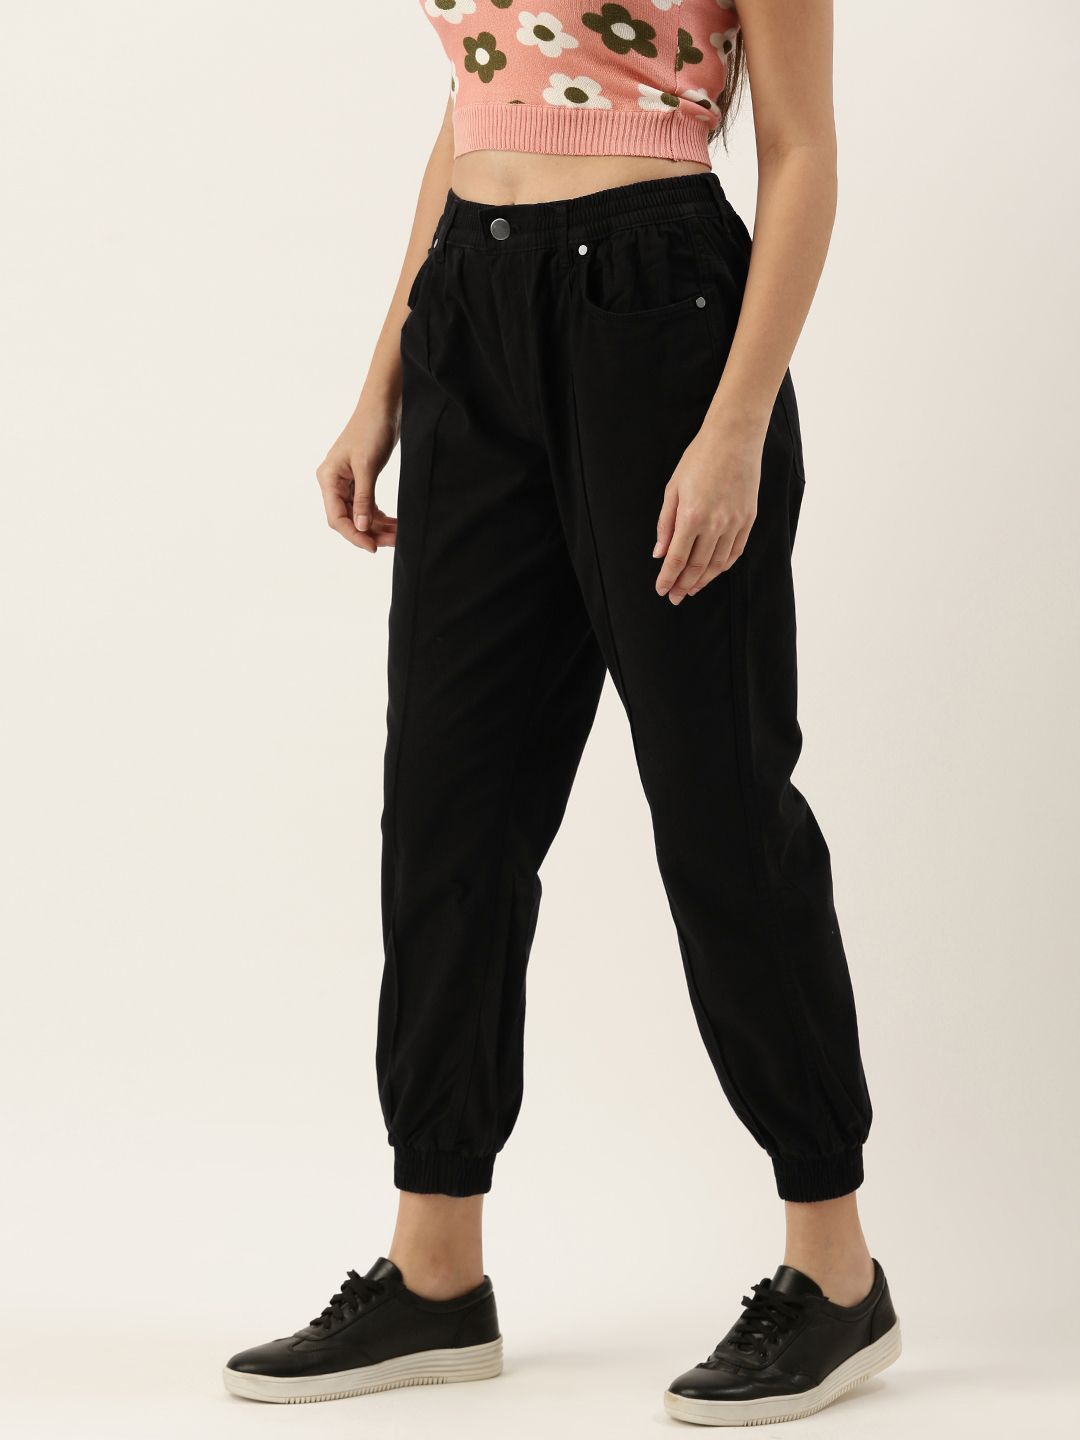 FOREVER 21 Women Black Joggers Price in India